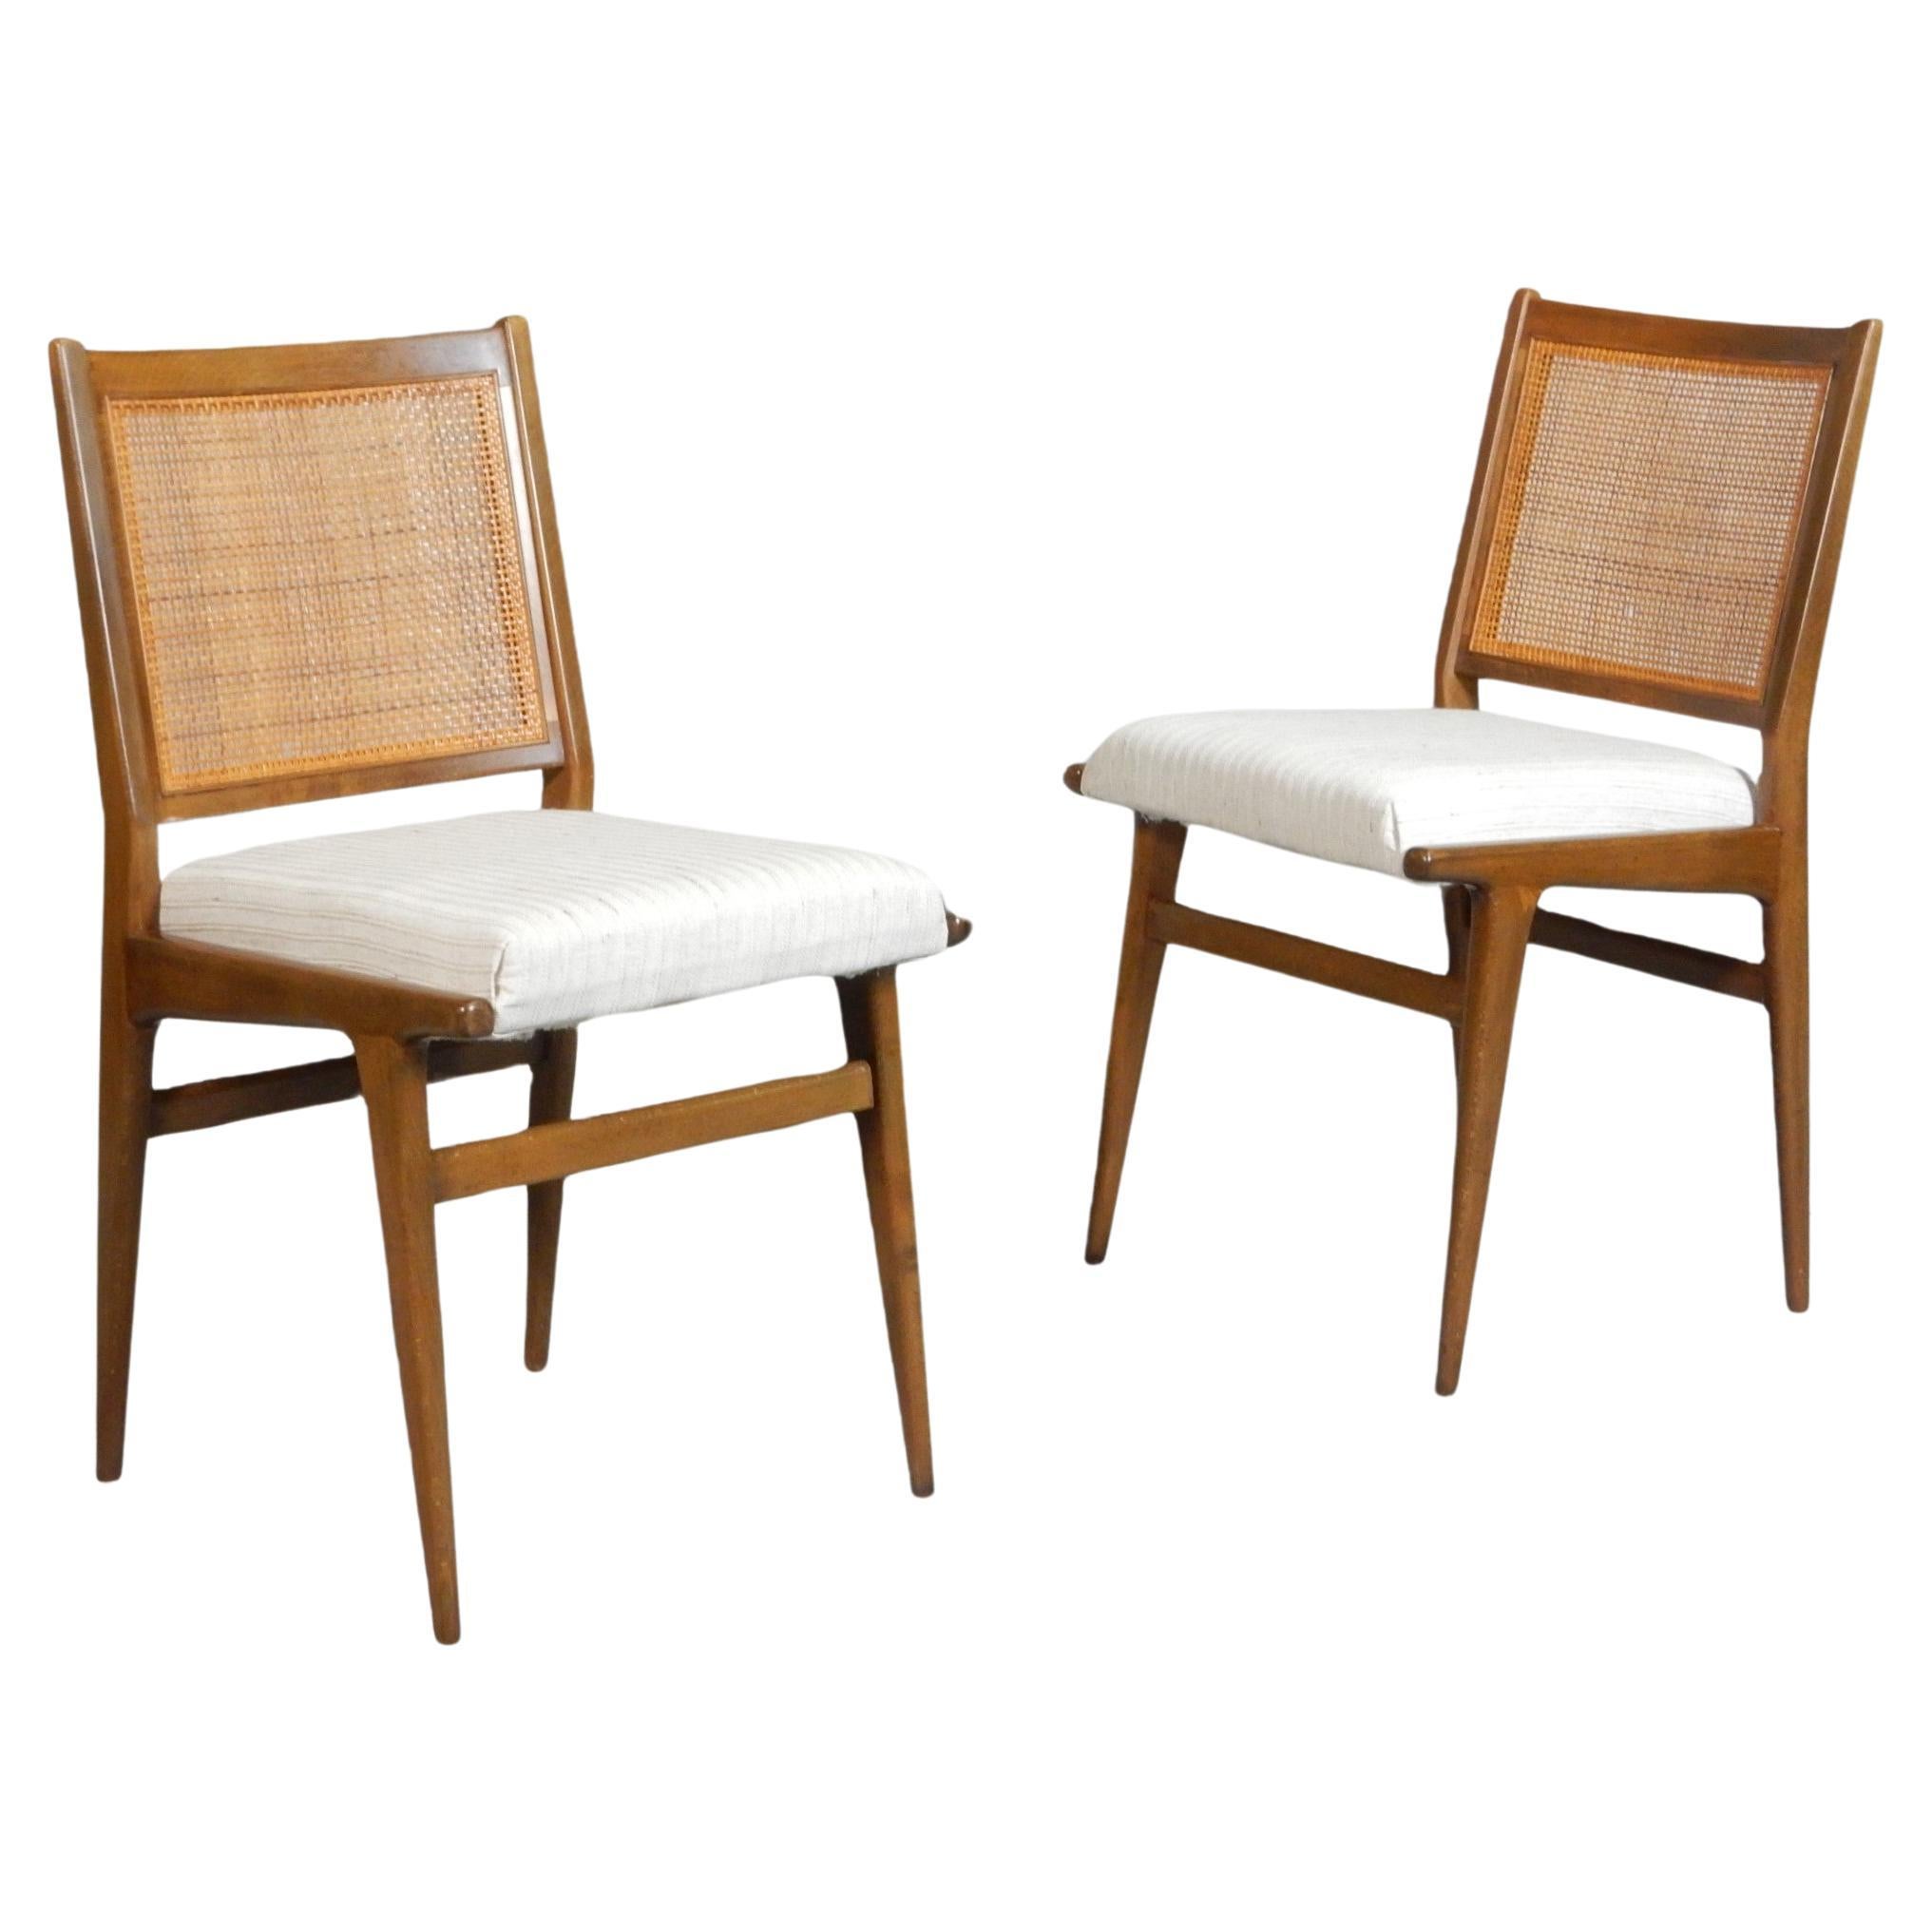 1950's Jens Risom design Cane Back Dining Chairs by J.O. Carlssons Möbelindustri For Sale